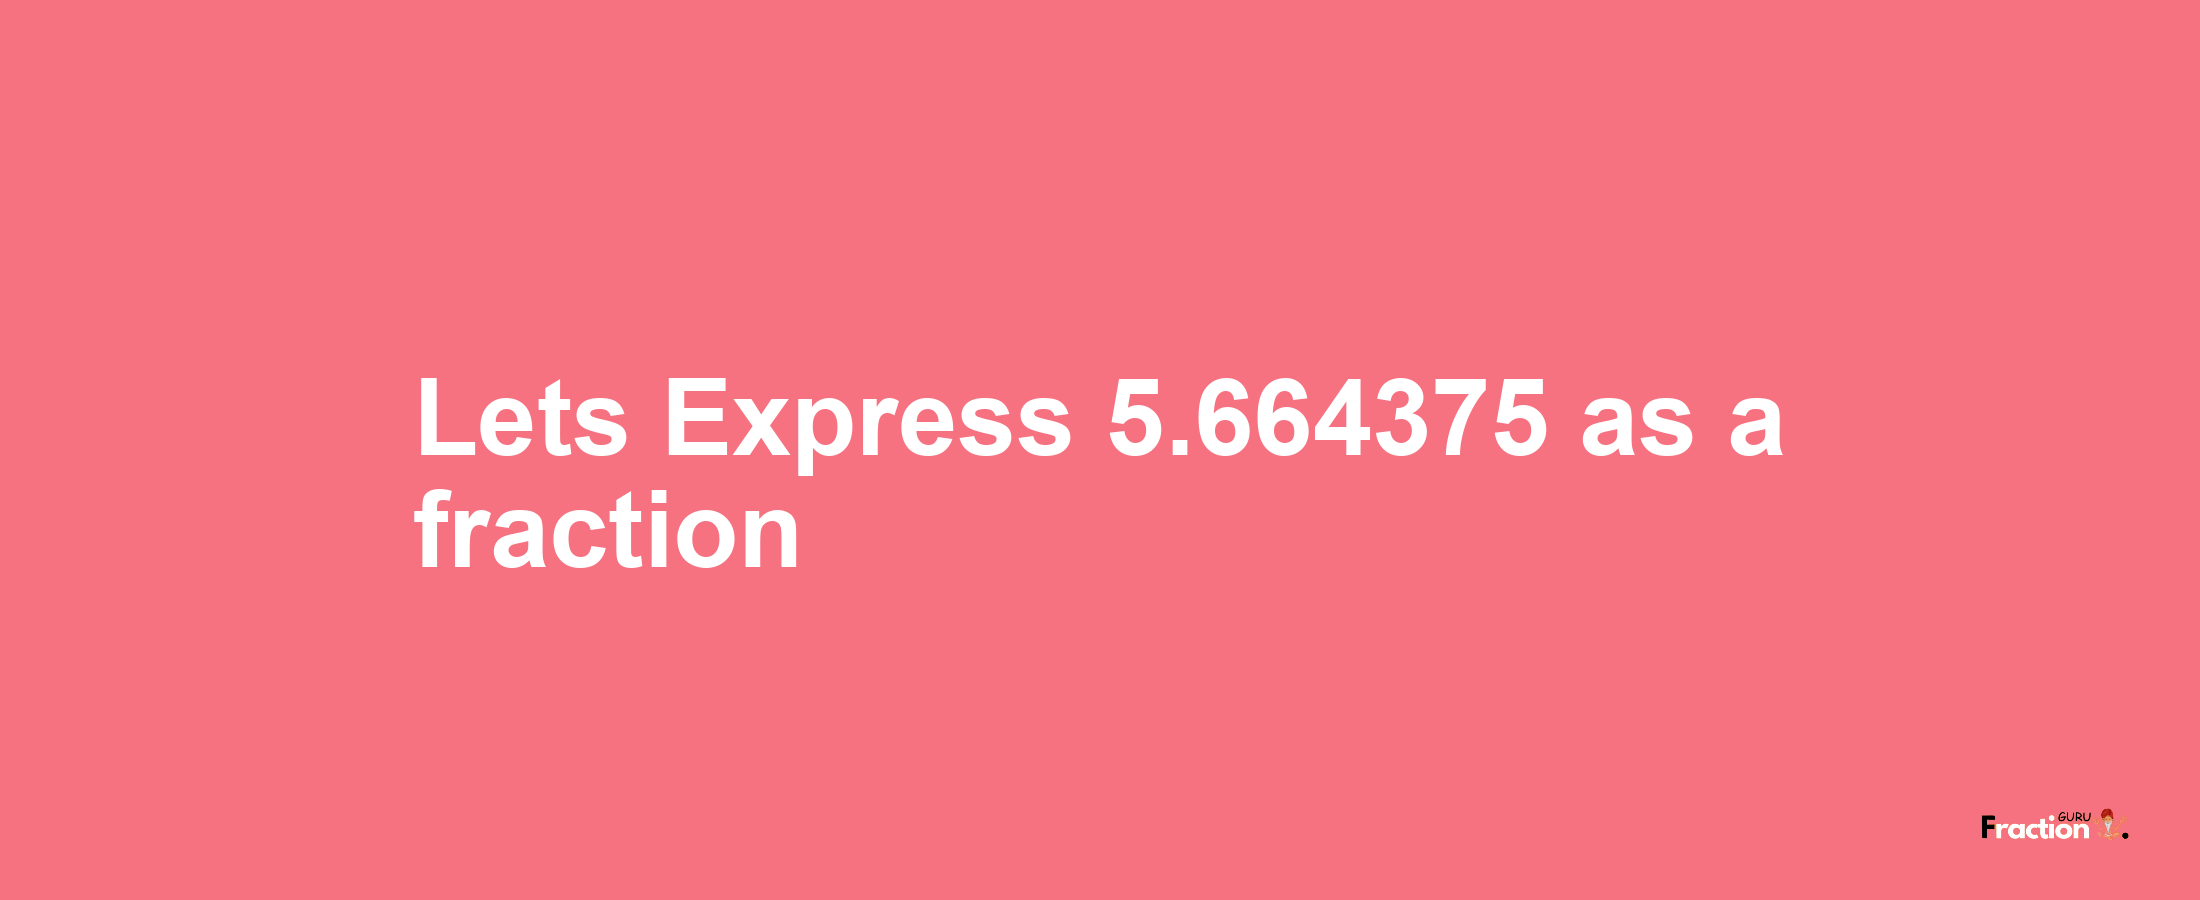 Lets Express 5.664375 as afraction